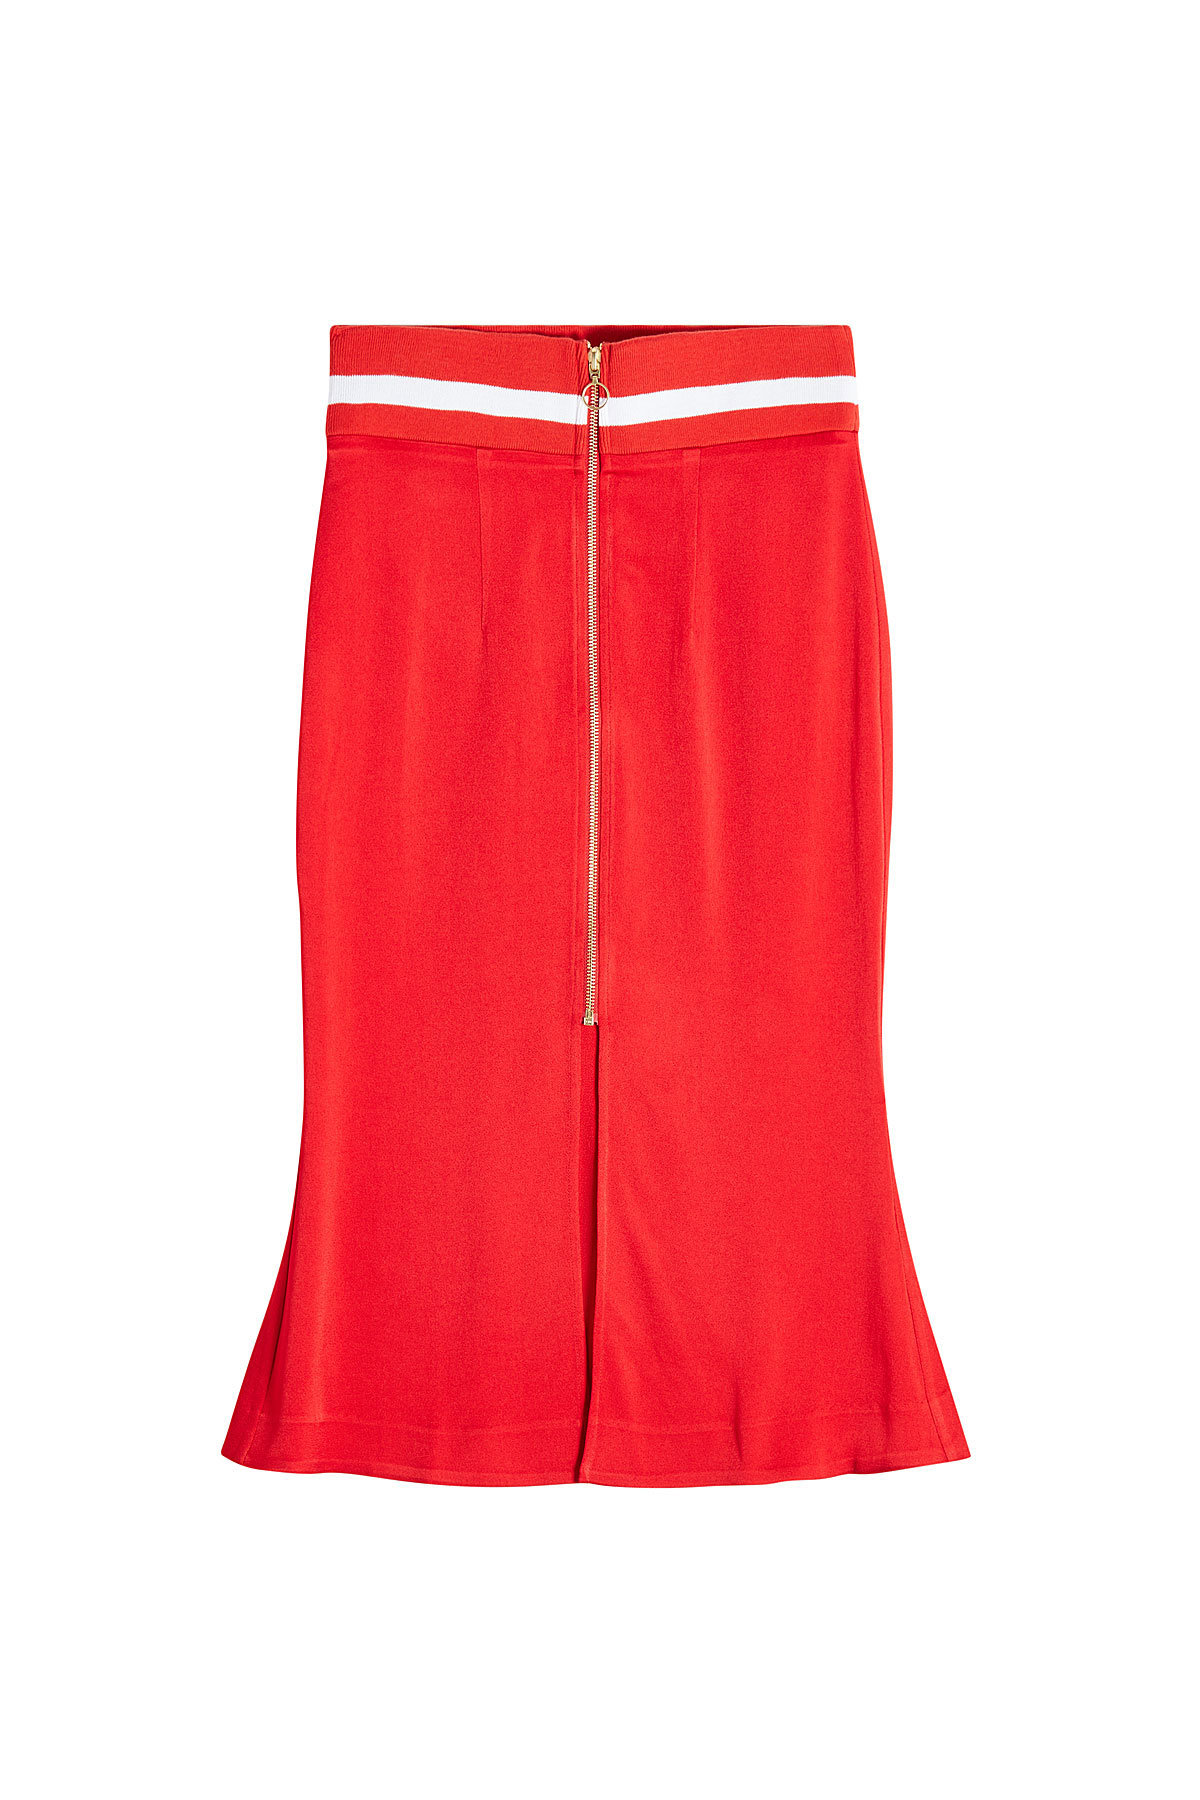 Maggie Marilyn - Crepe Skirt with Fluted Hem